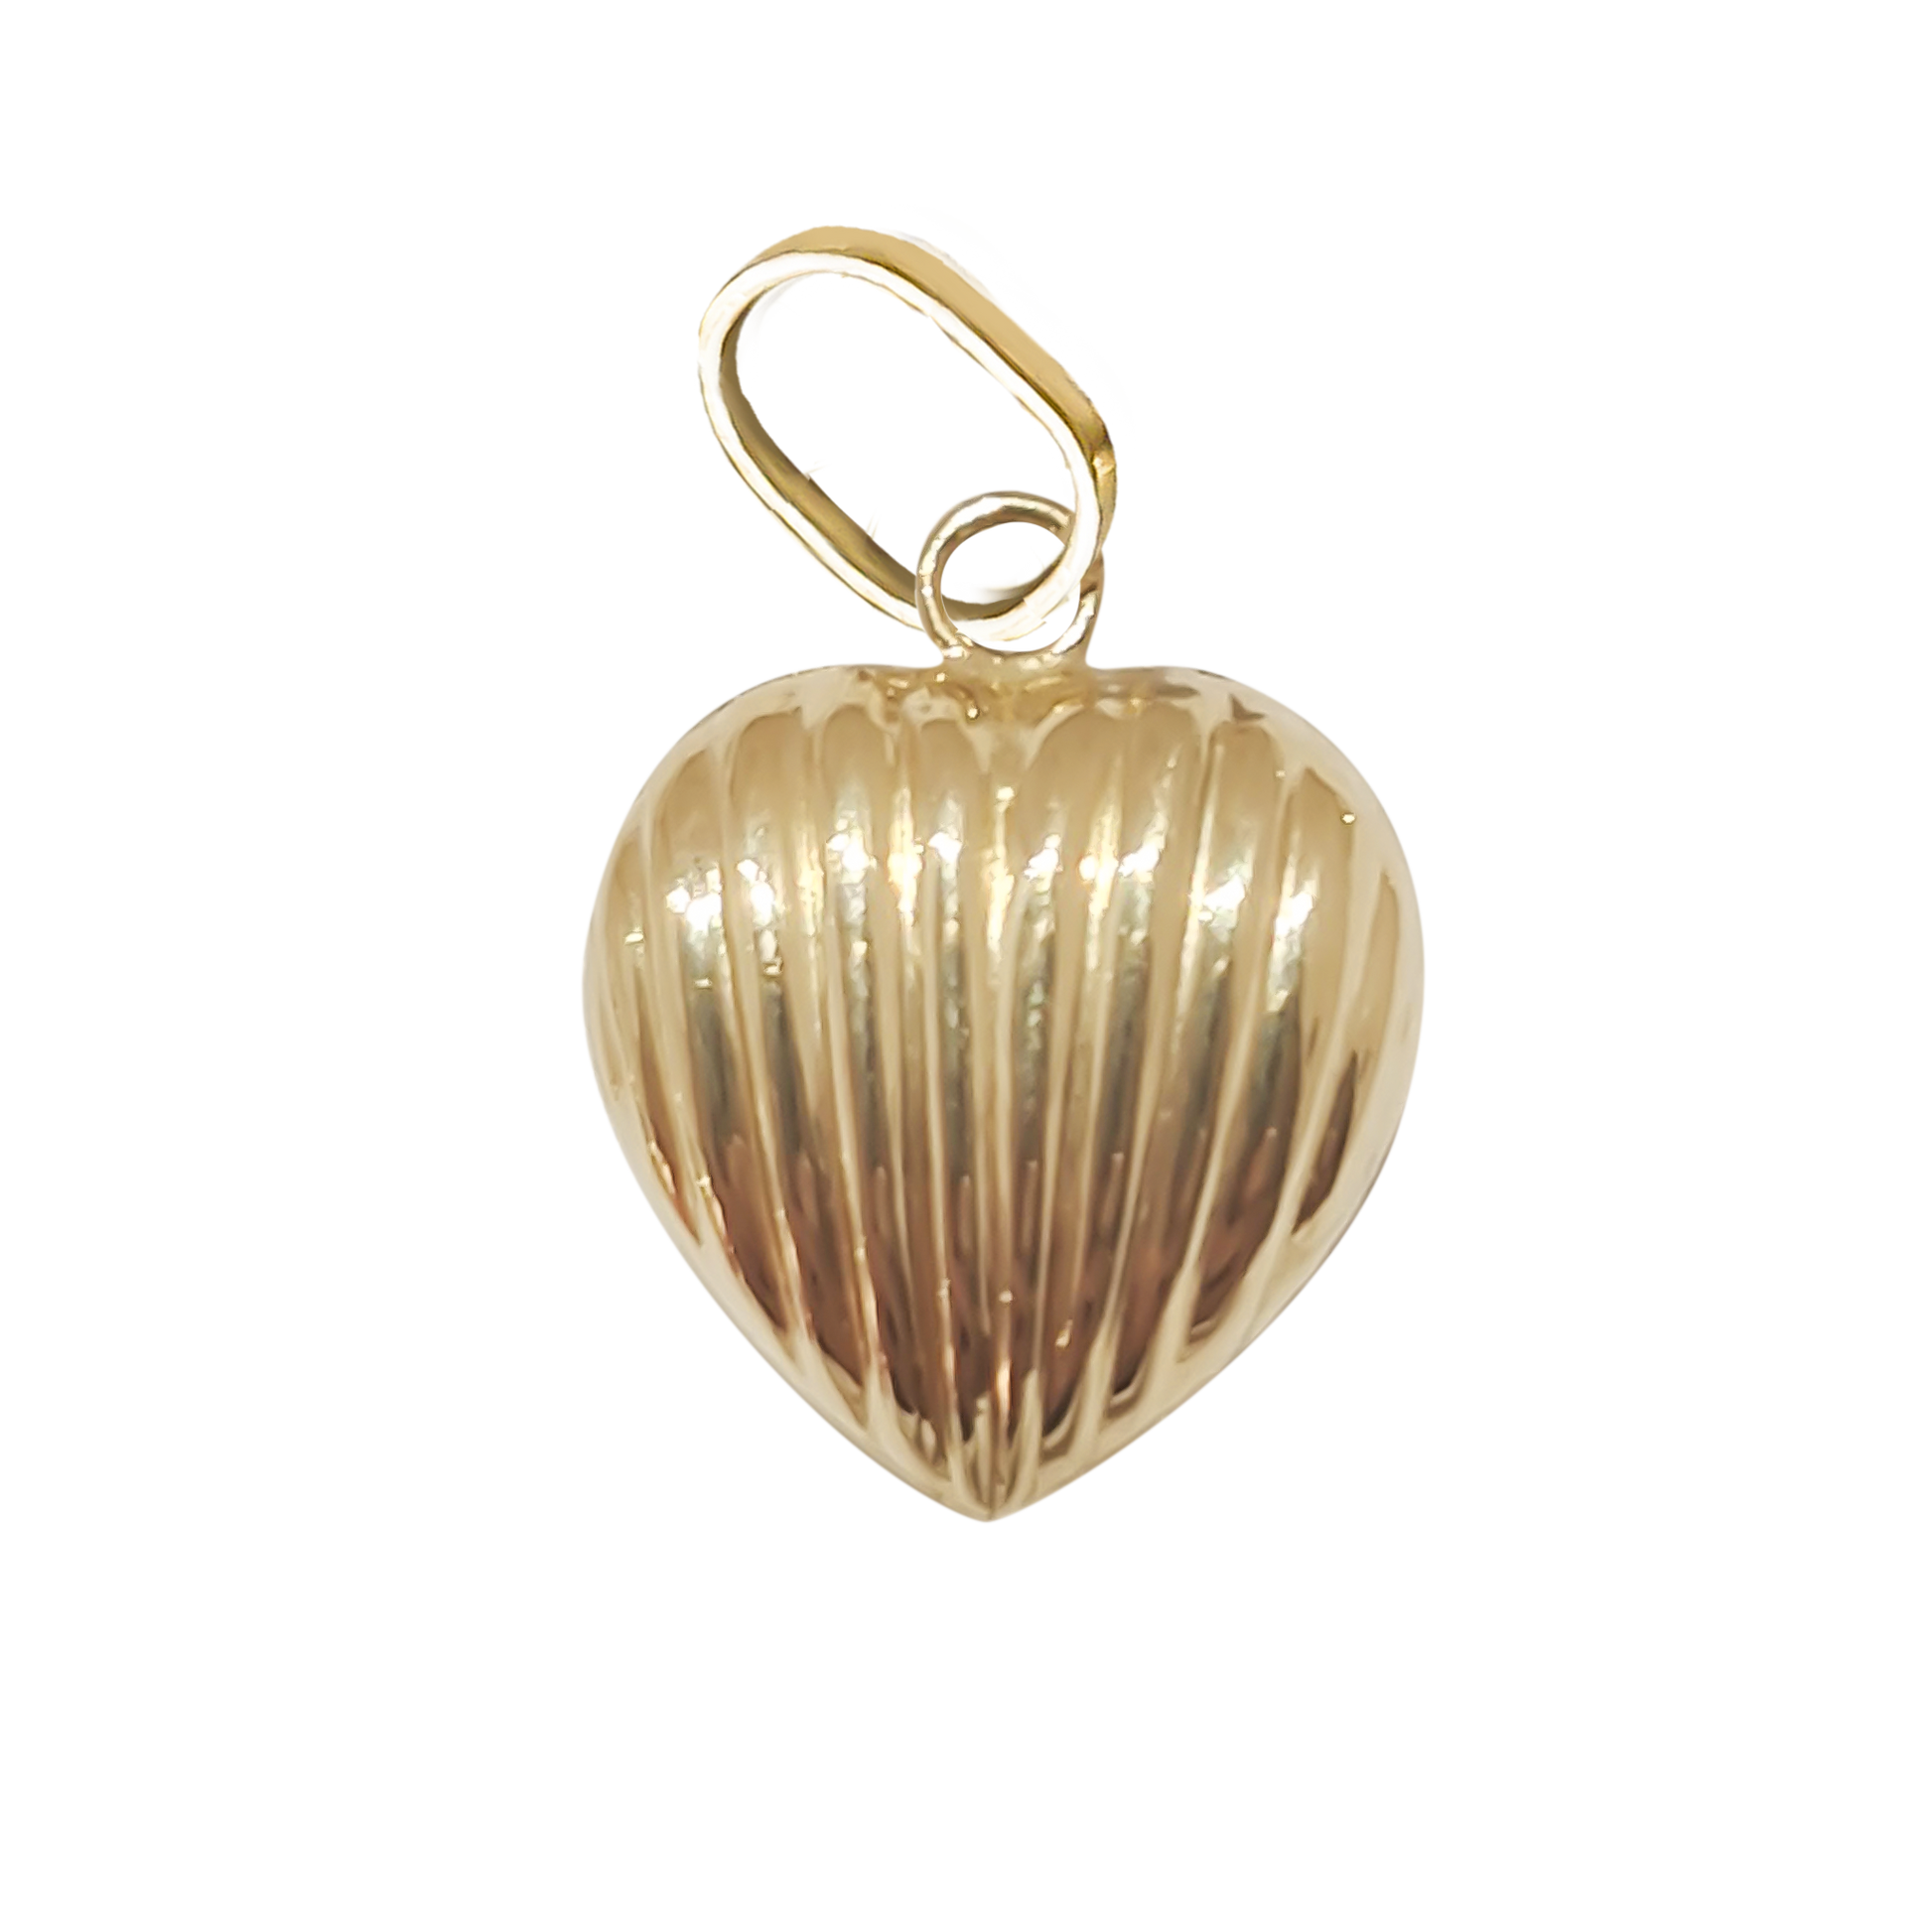 15mm Striped Heart Charm 9ct Yellow Gold